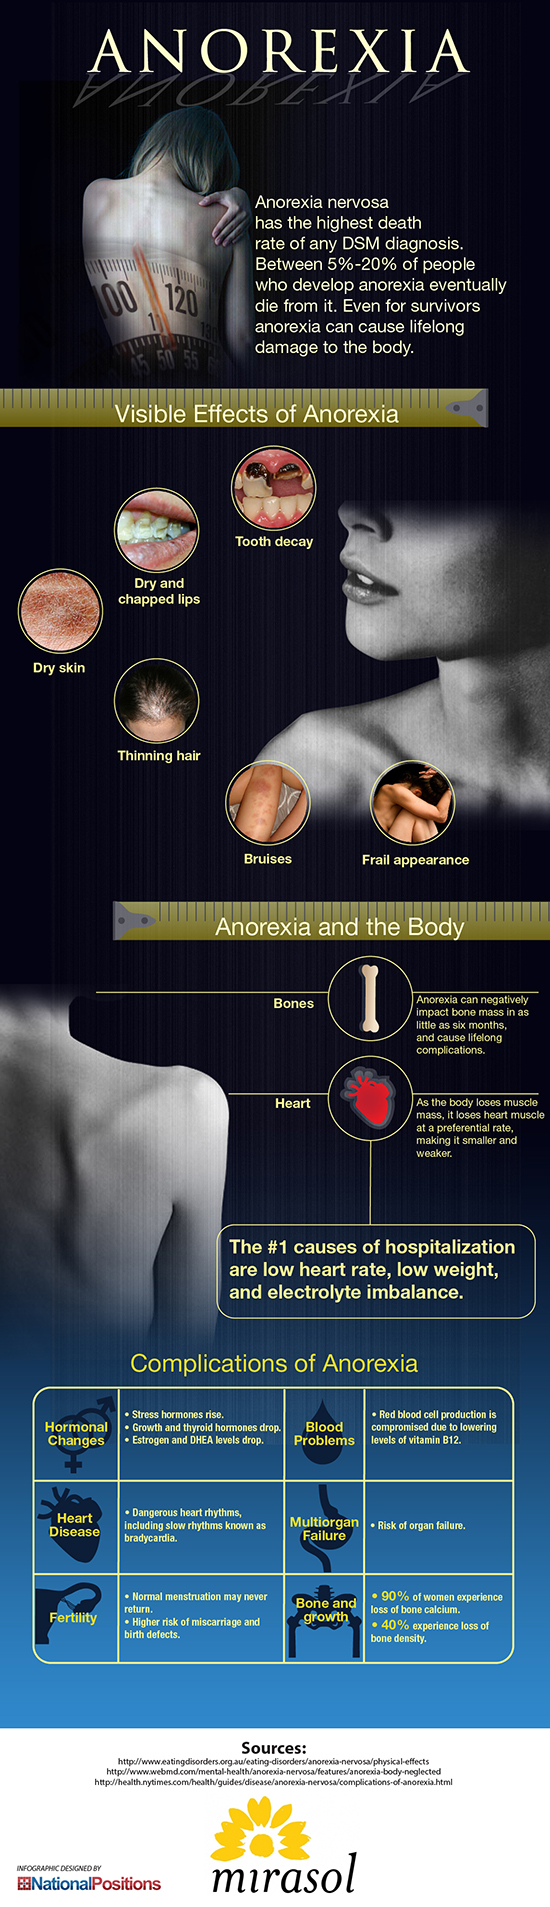 What are the symptoms of anorexia nervosa?